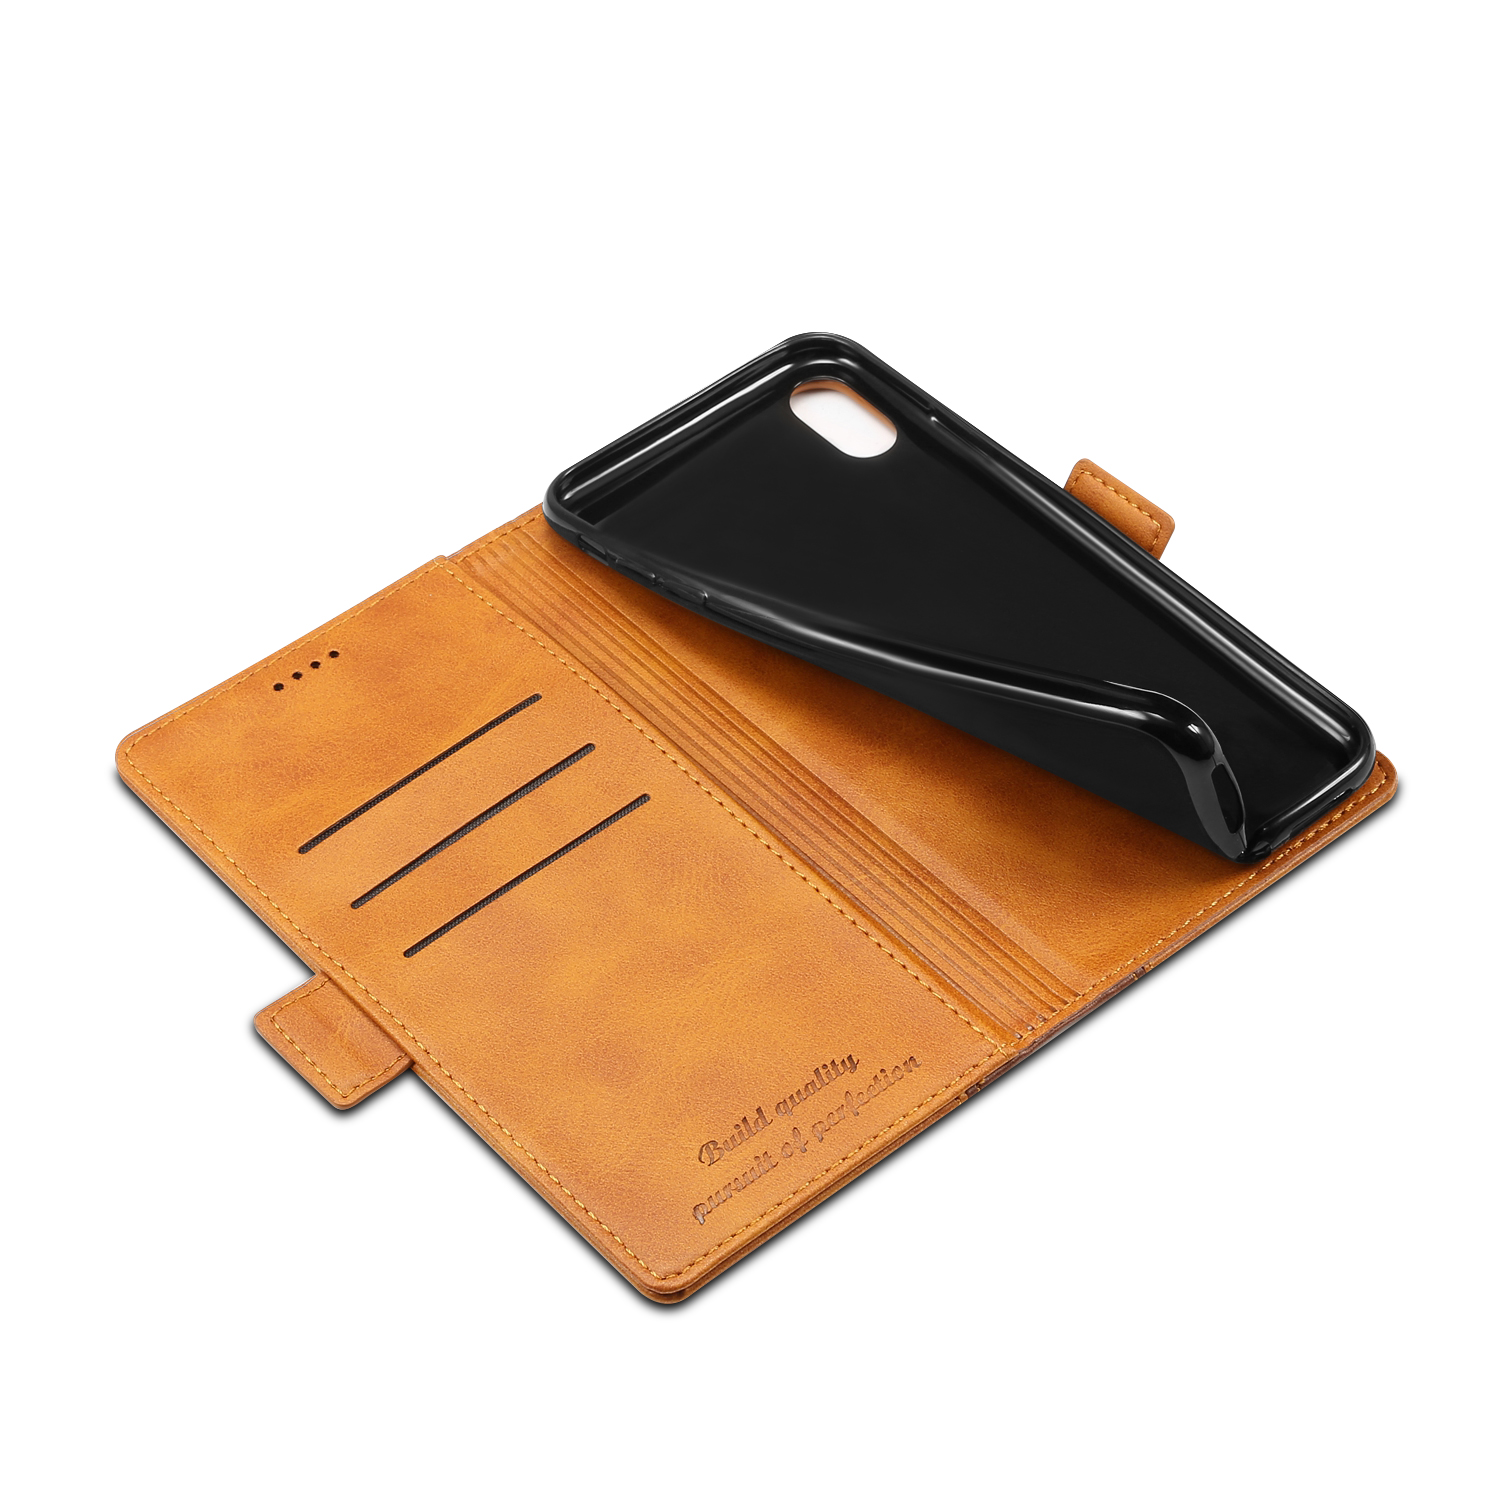 Bakeey-Hybrid-Color-Wallet-Card-Sots-Kickstand-Protective-Case-For-iPhone-XR-1380898